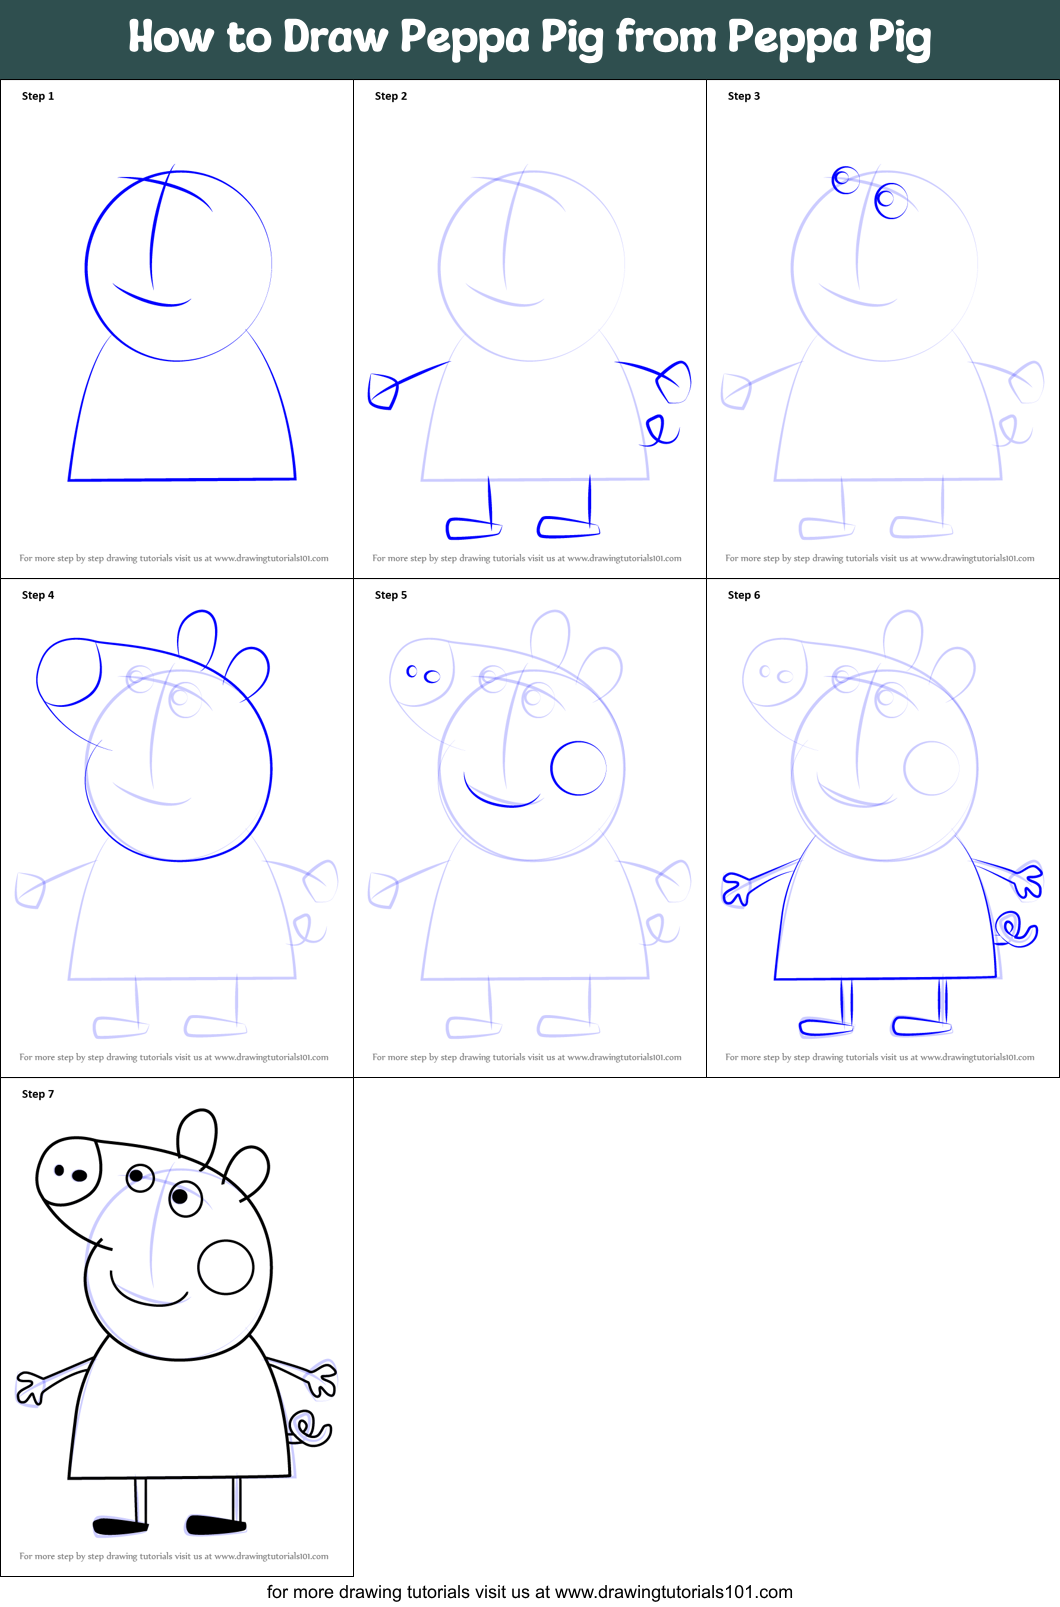 How to Draw Peppa Pig from Peppa Pig printable step by step drawing